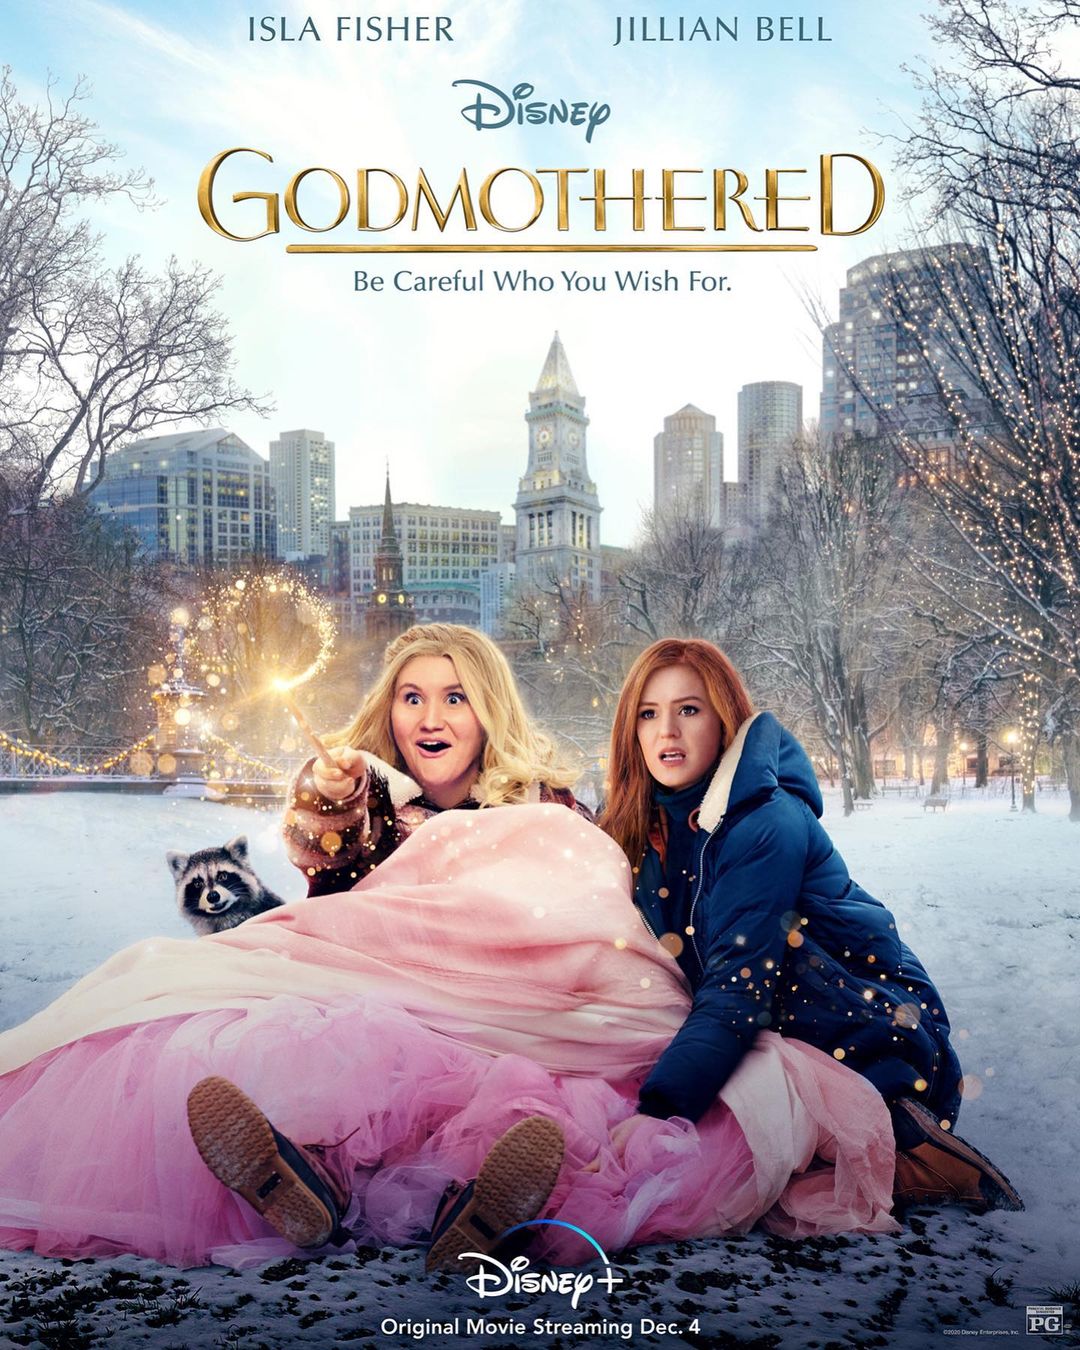 Be Careful Who You Wish For: GODMOTHERED on Disney + [REVIEW]